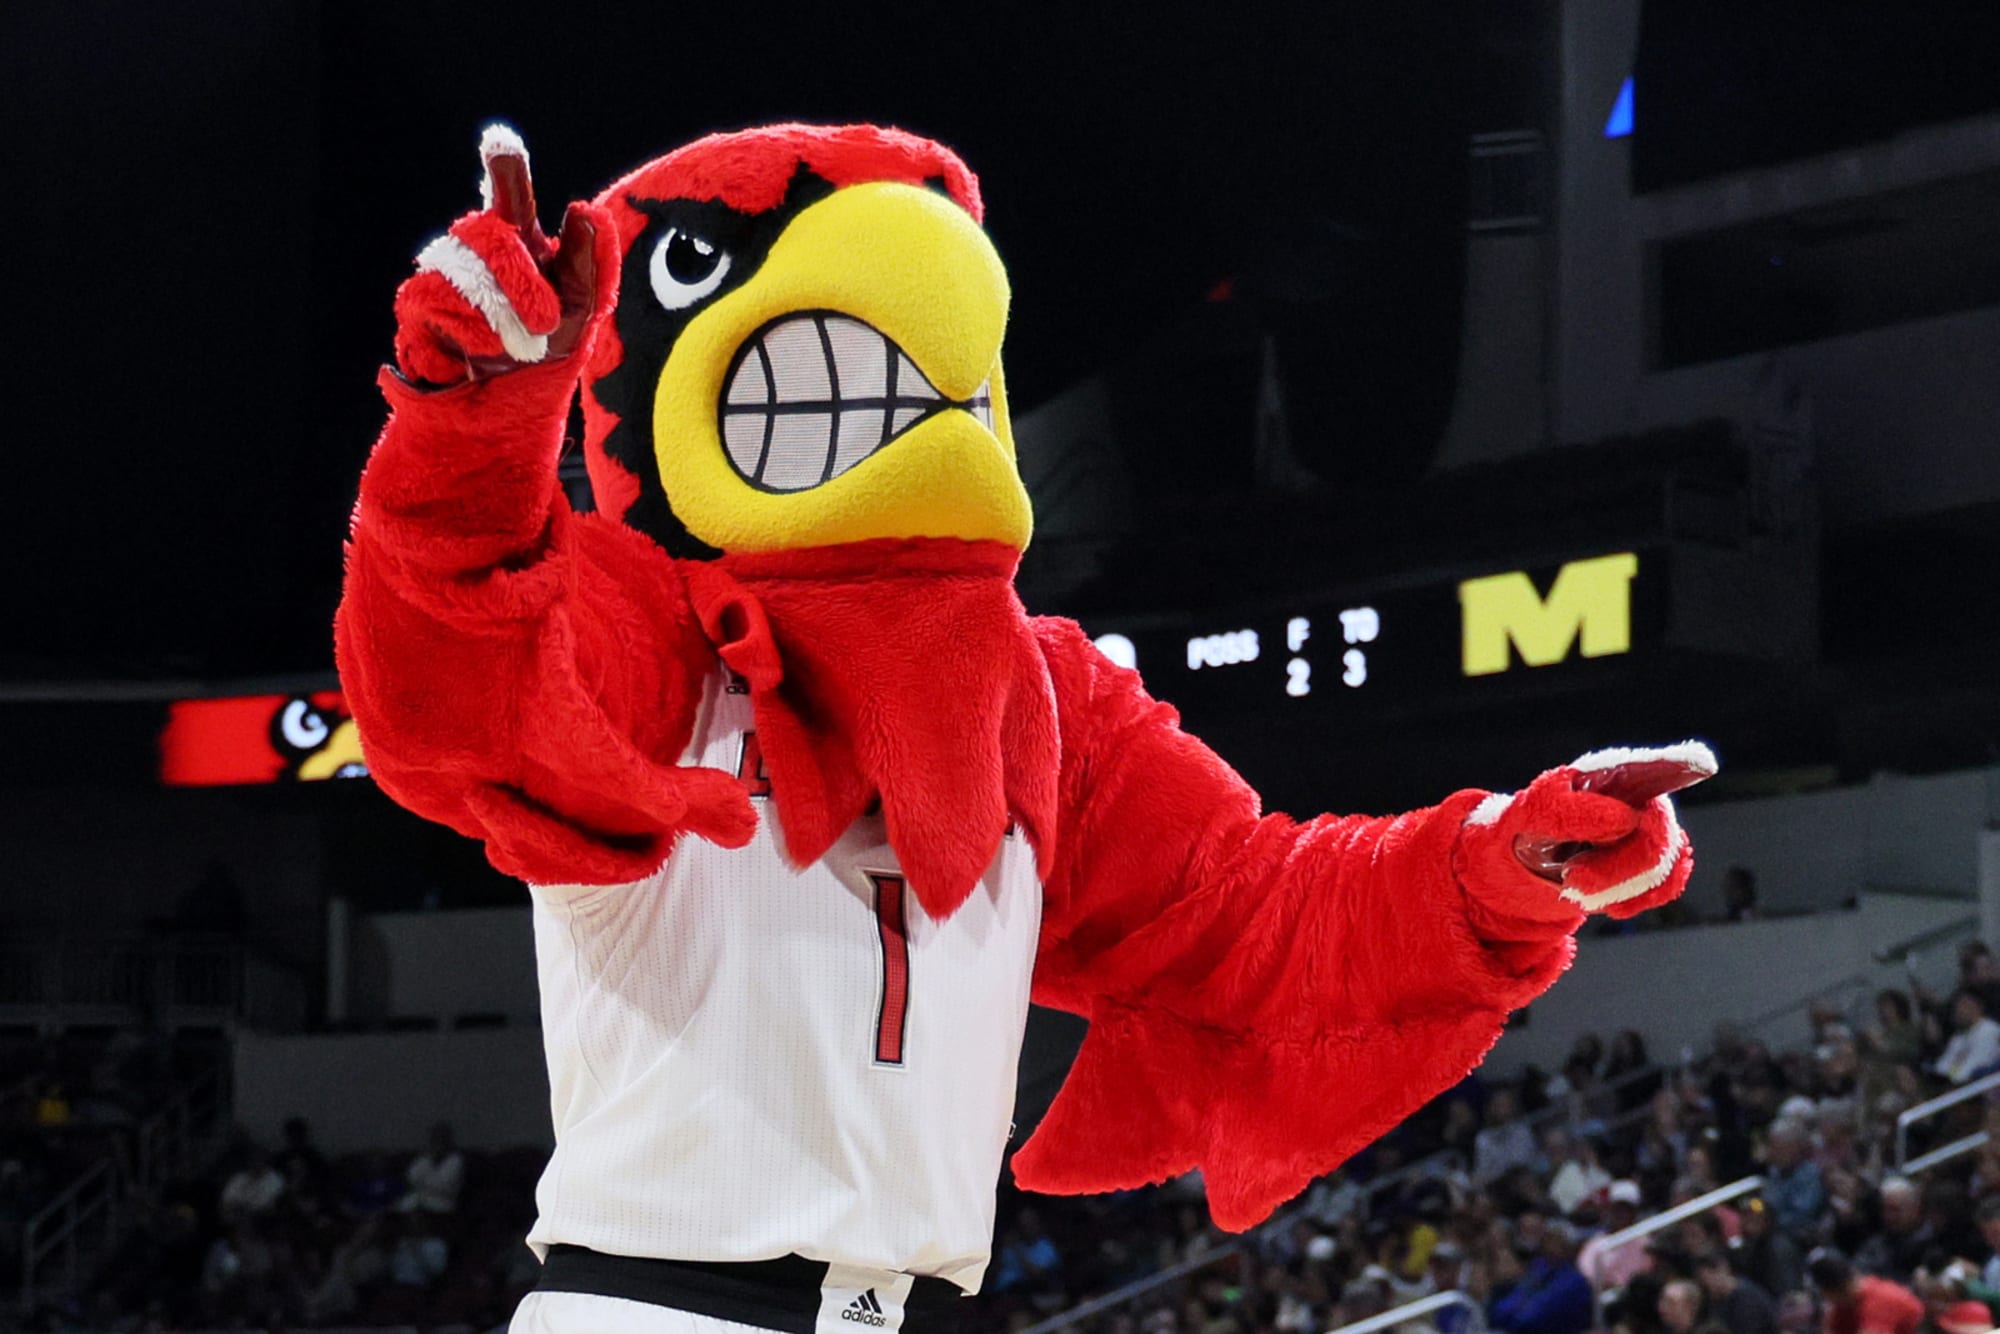 Louisville Cardinals Unveil New Uniforms Ahead Of Chick-fil-A